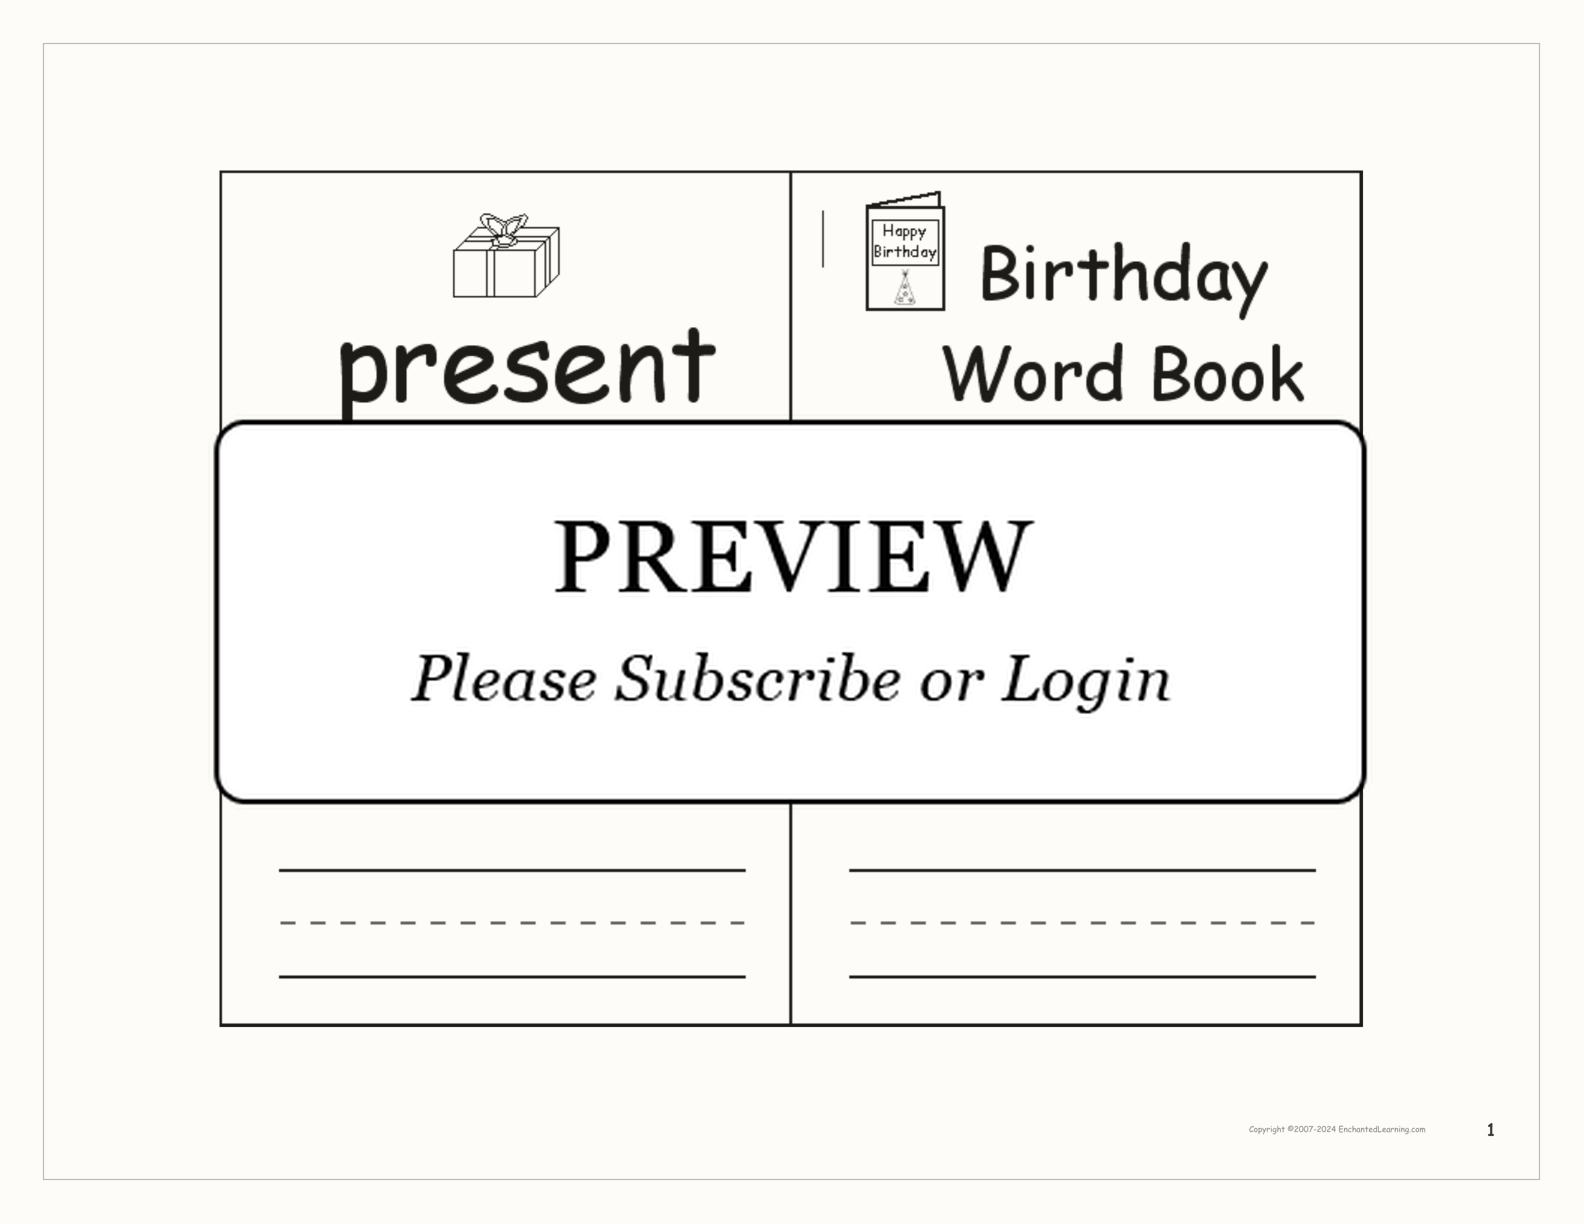 Birthday Words Book interactive printout page 1